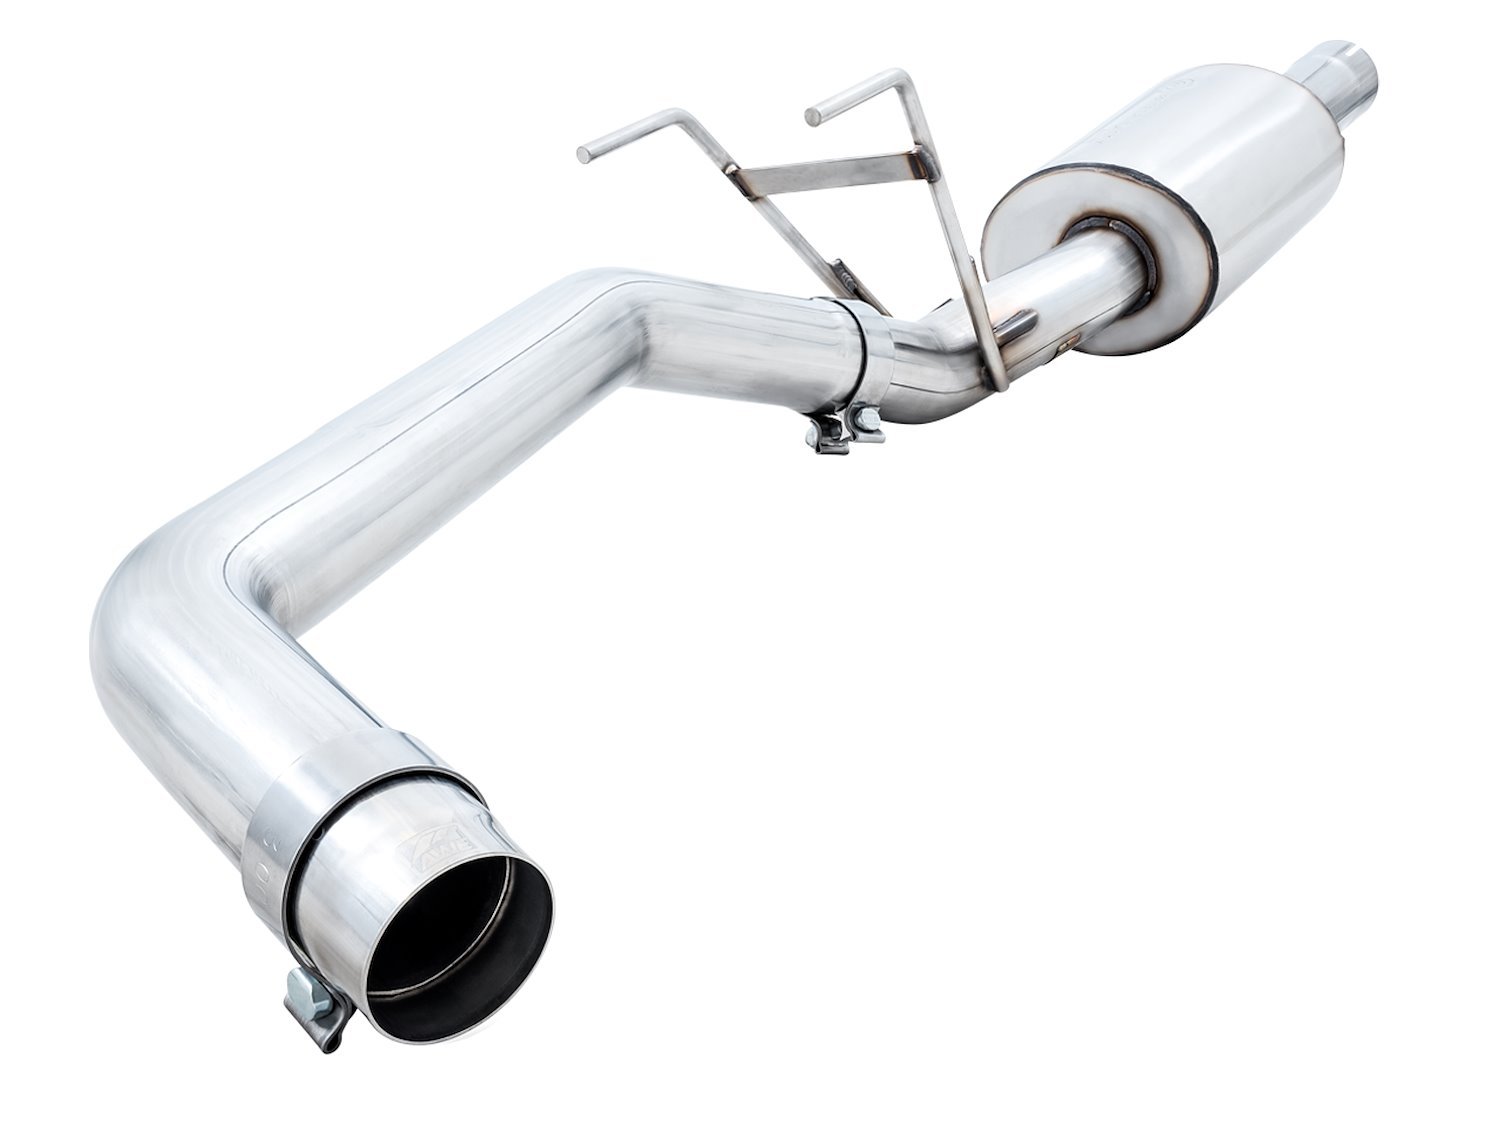 0FG Single Side Exit Cat-back Exhaust for 4th Gen RAM 1500 5.7L (without bumper cutouts) - Dual Chrome Tips